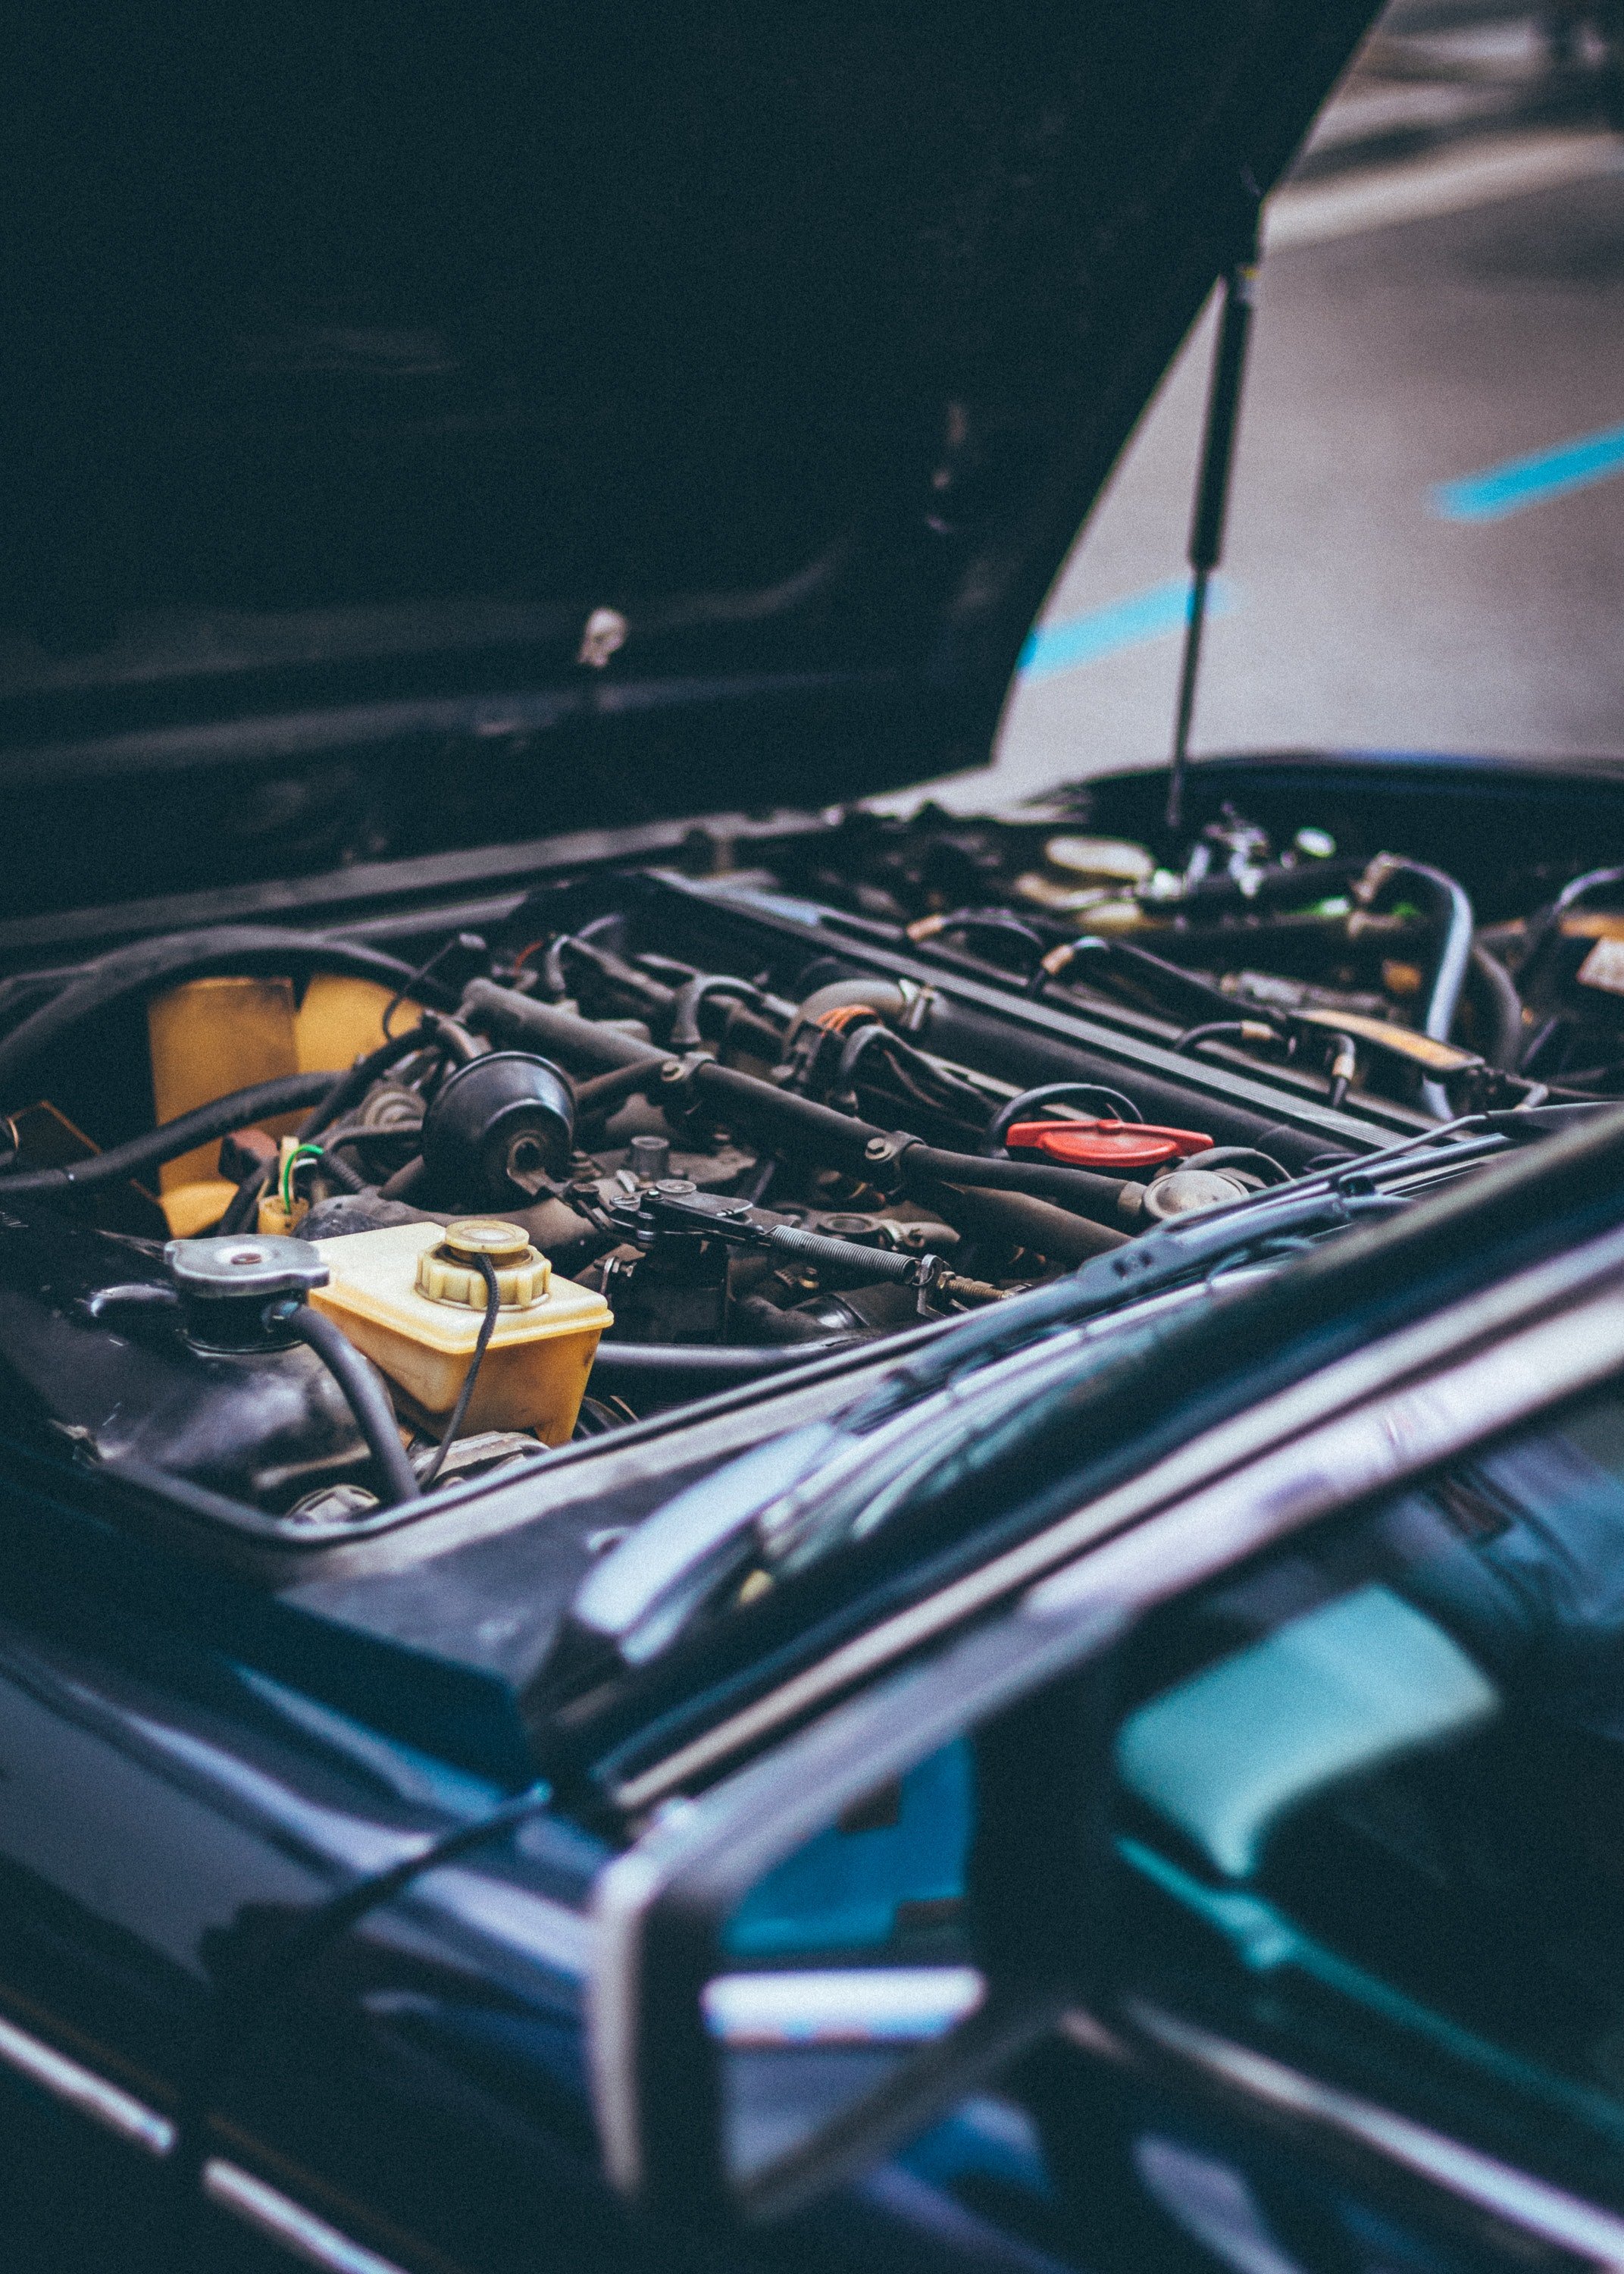 A close-up of a car engine. | Photo: Pexels/George Sultan